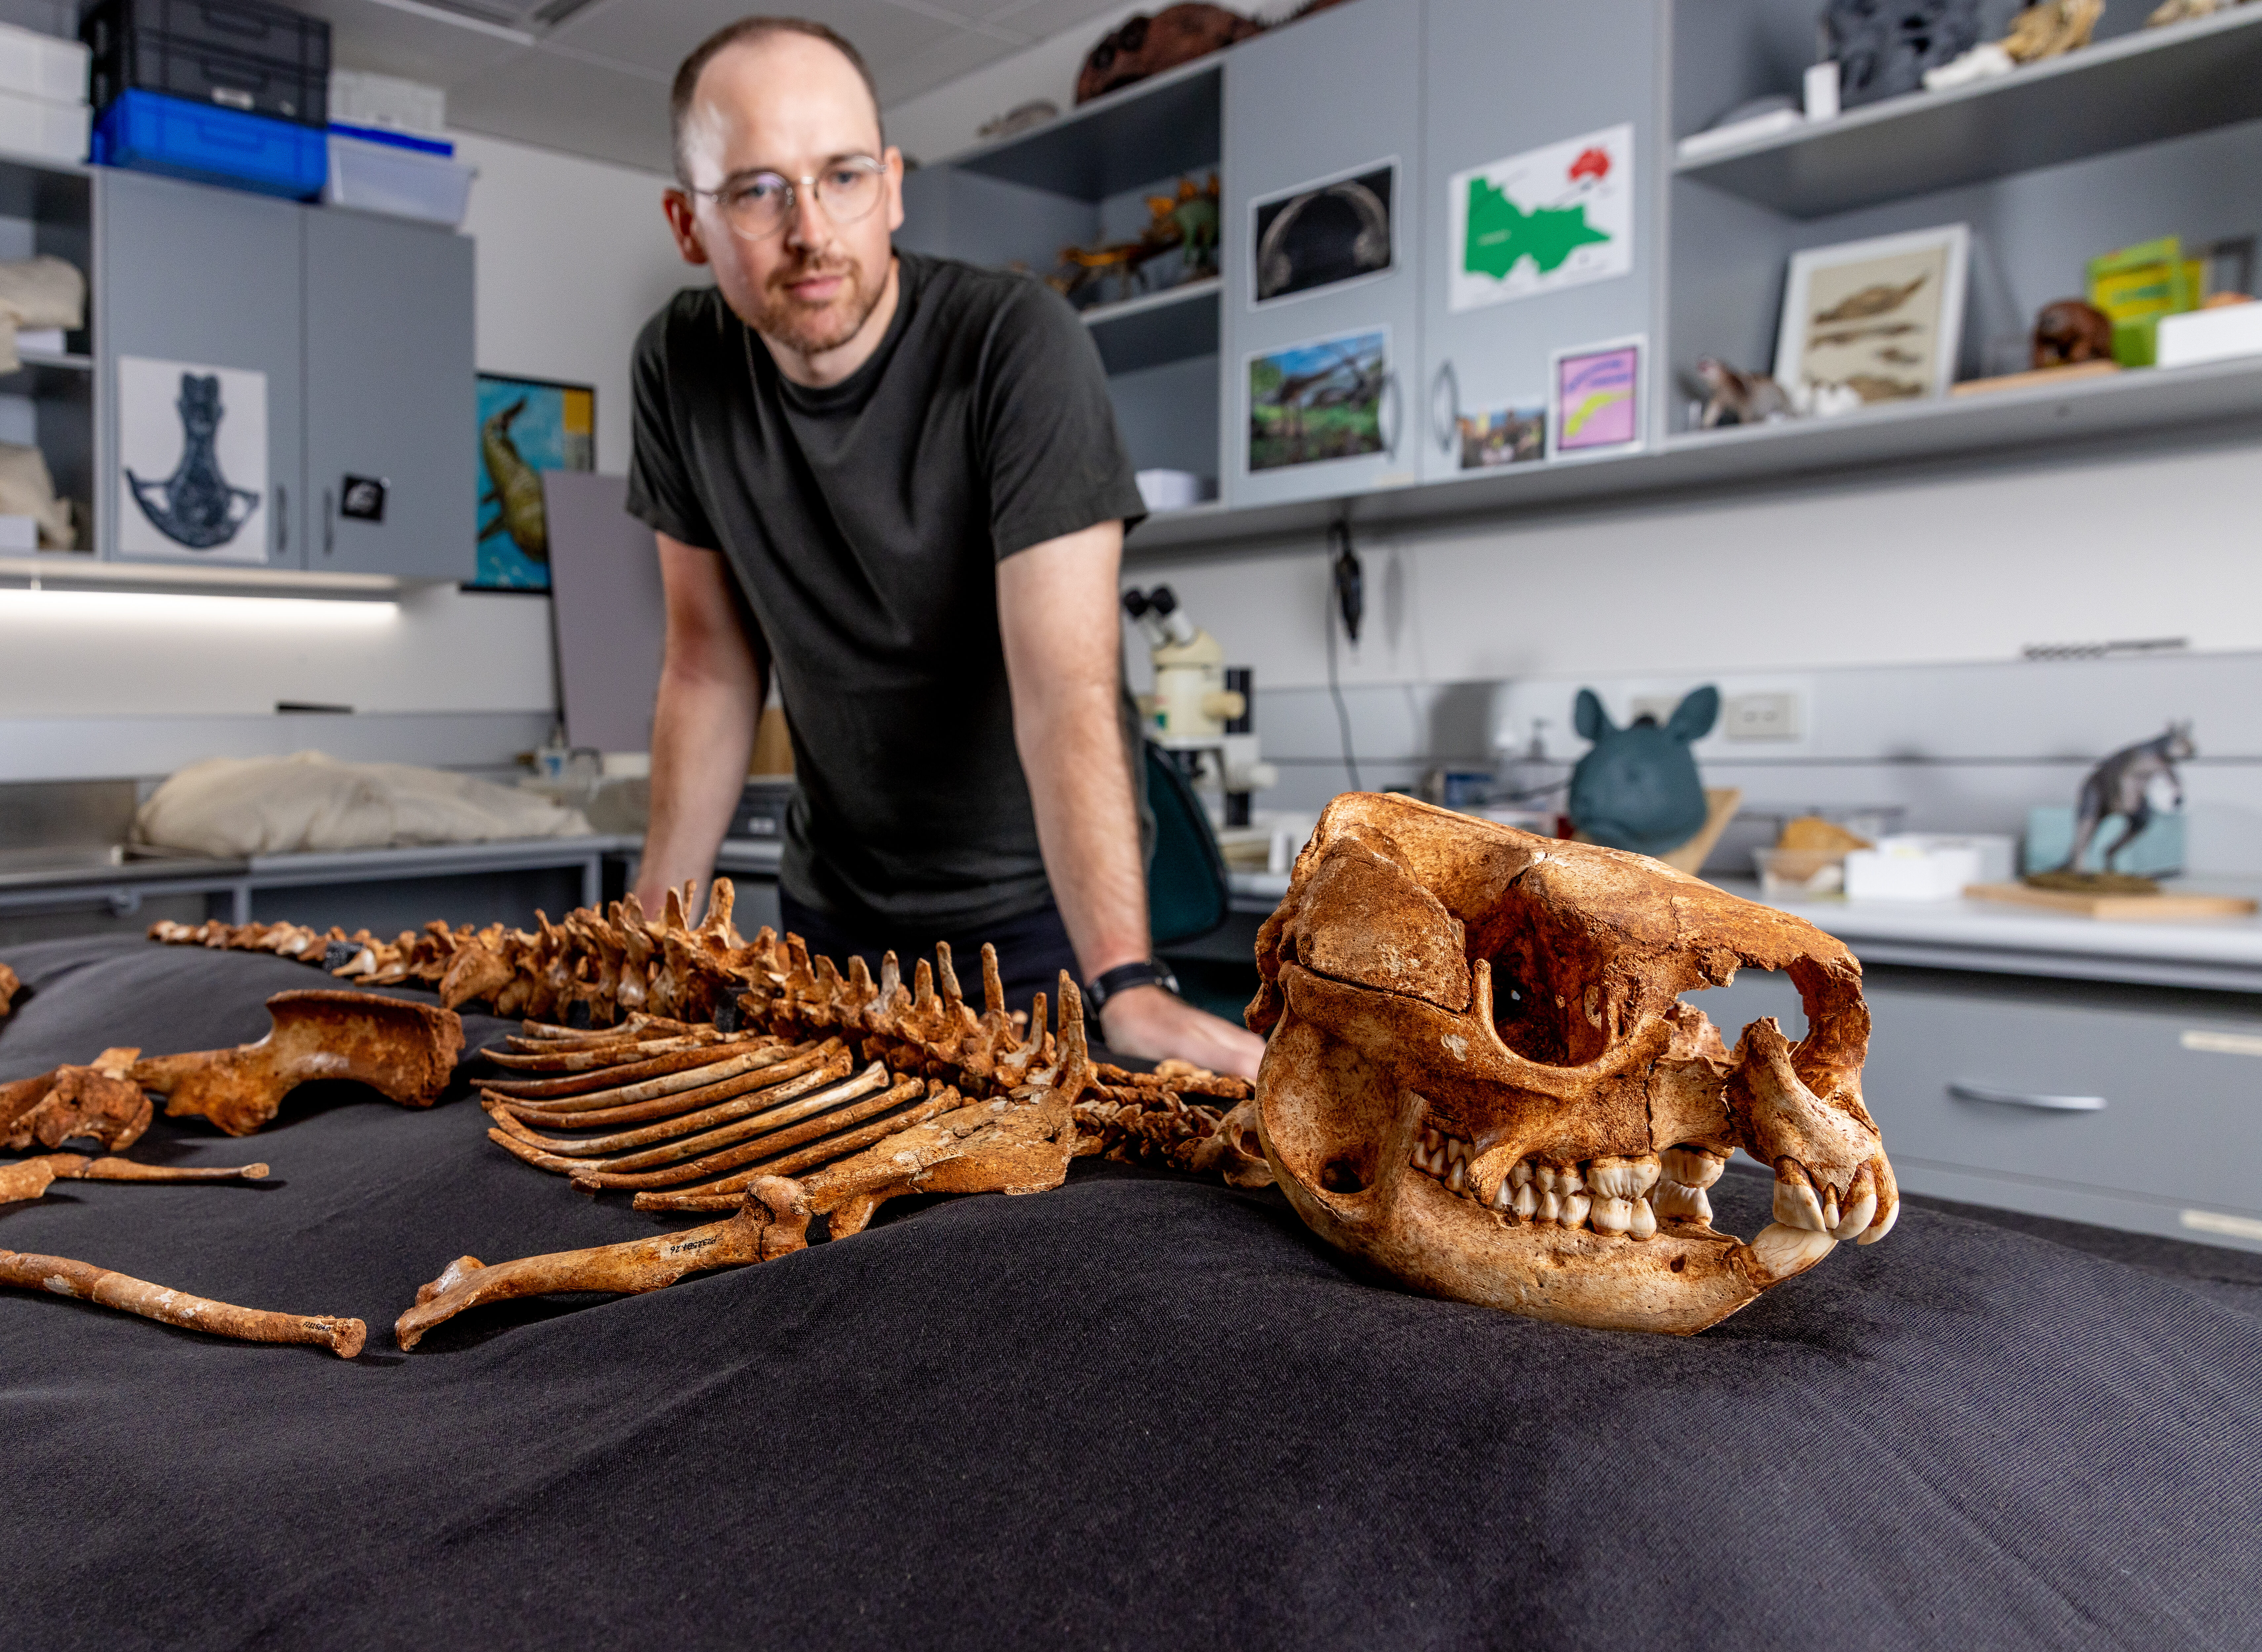 Image for article: Near-complete 50,000 year-old kangaroo skeleton retrieved from underground cave